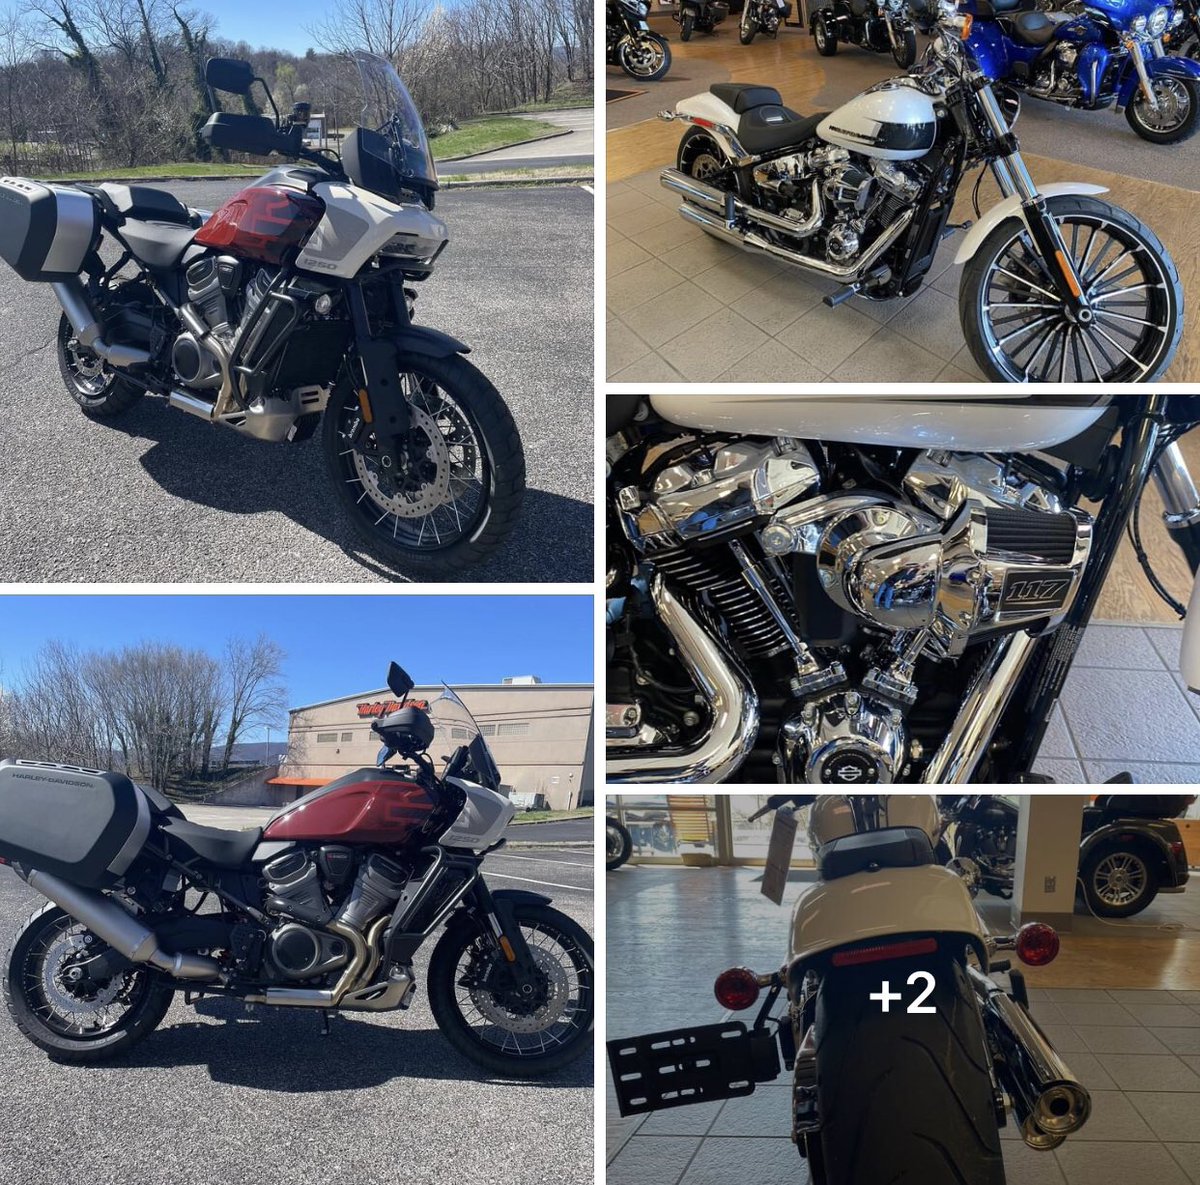 More new bikes hitting the floor at Roanoke Valley Harley-Davidson- it’s time to ride!
#roanokevalleyharleydavidson #harleydavidson #panamerica #breakout #triglide